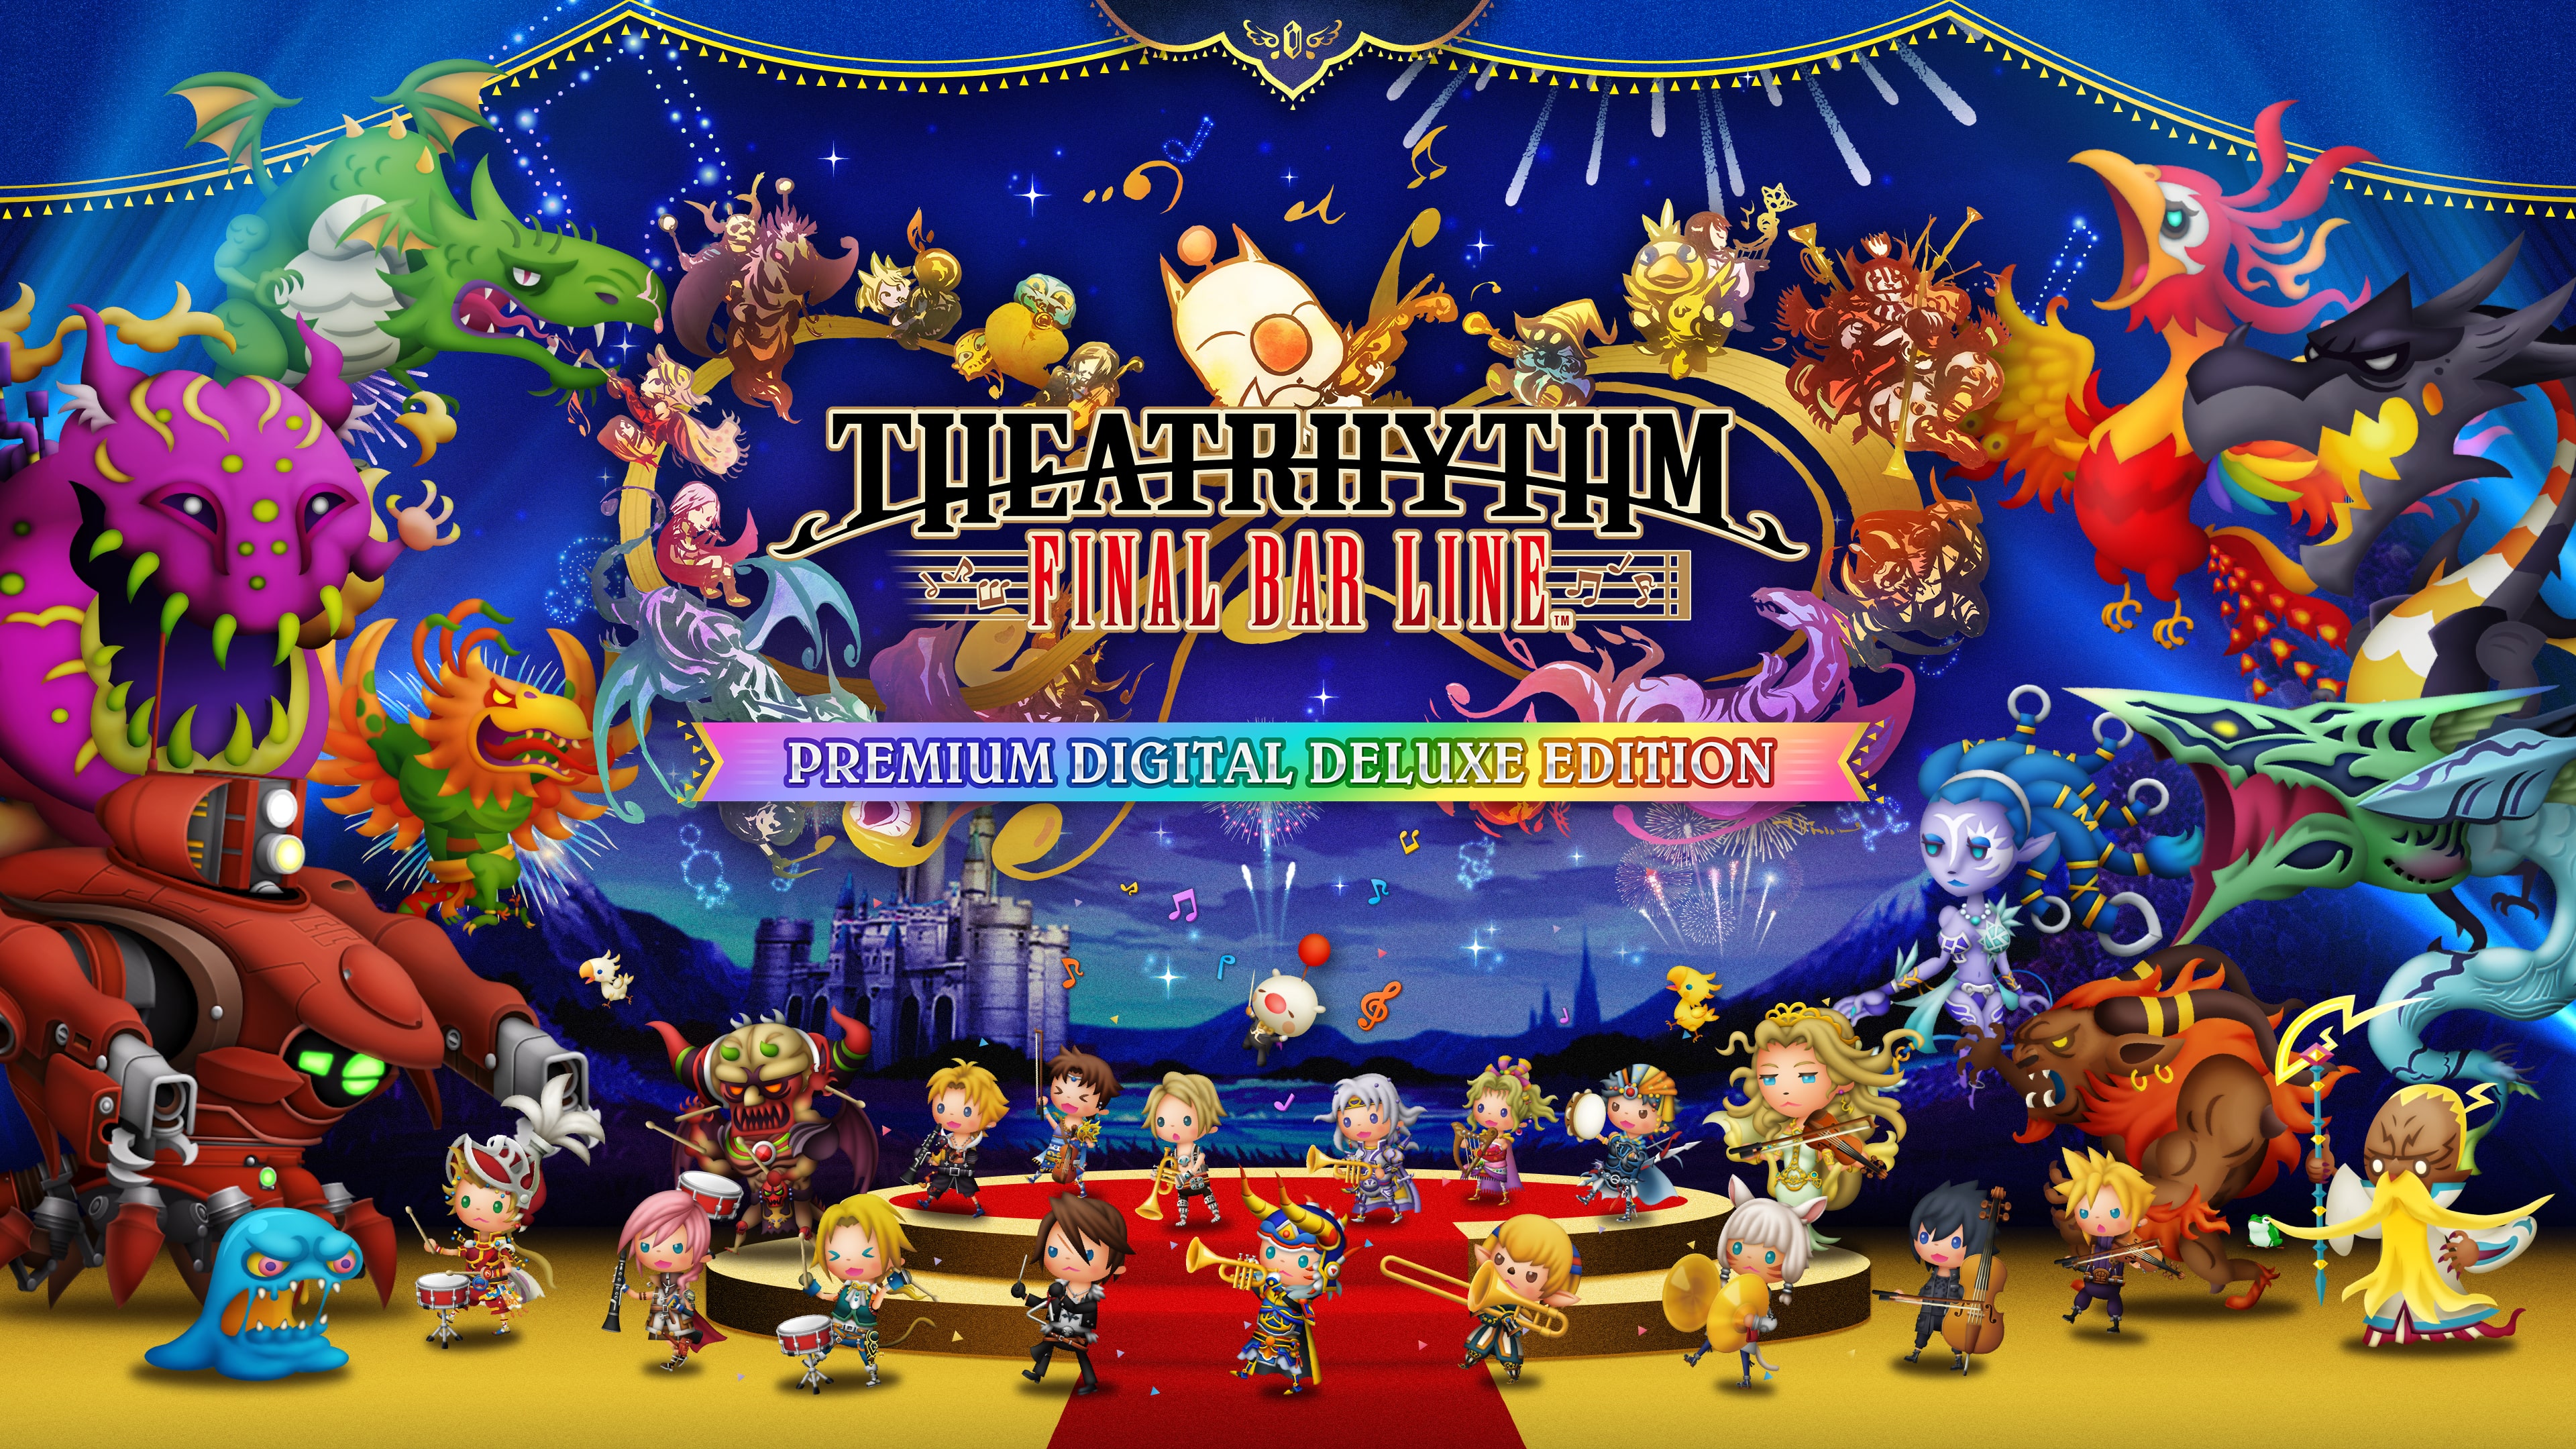 THEATRHYTHM FINAL BAR LINE Premium Digital Deluxe Edition (Simplified Chinese, English, Korean, Japanese, Traditional Chinese)